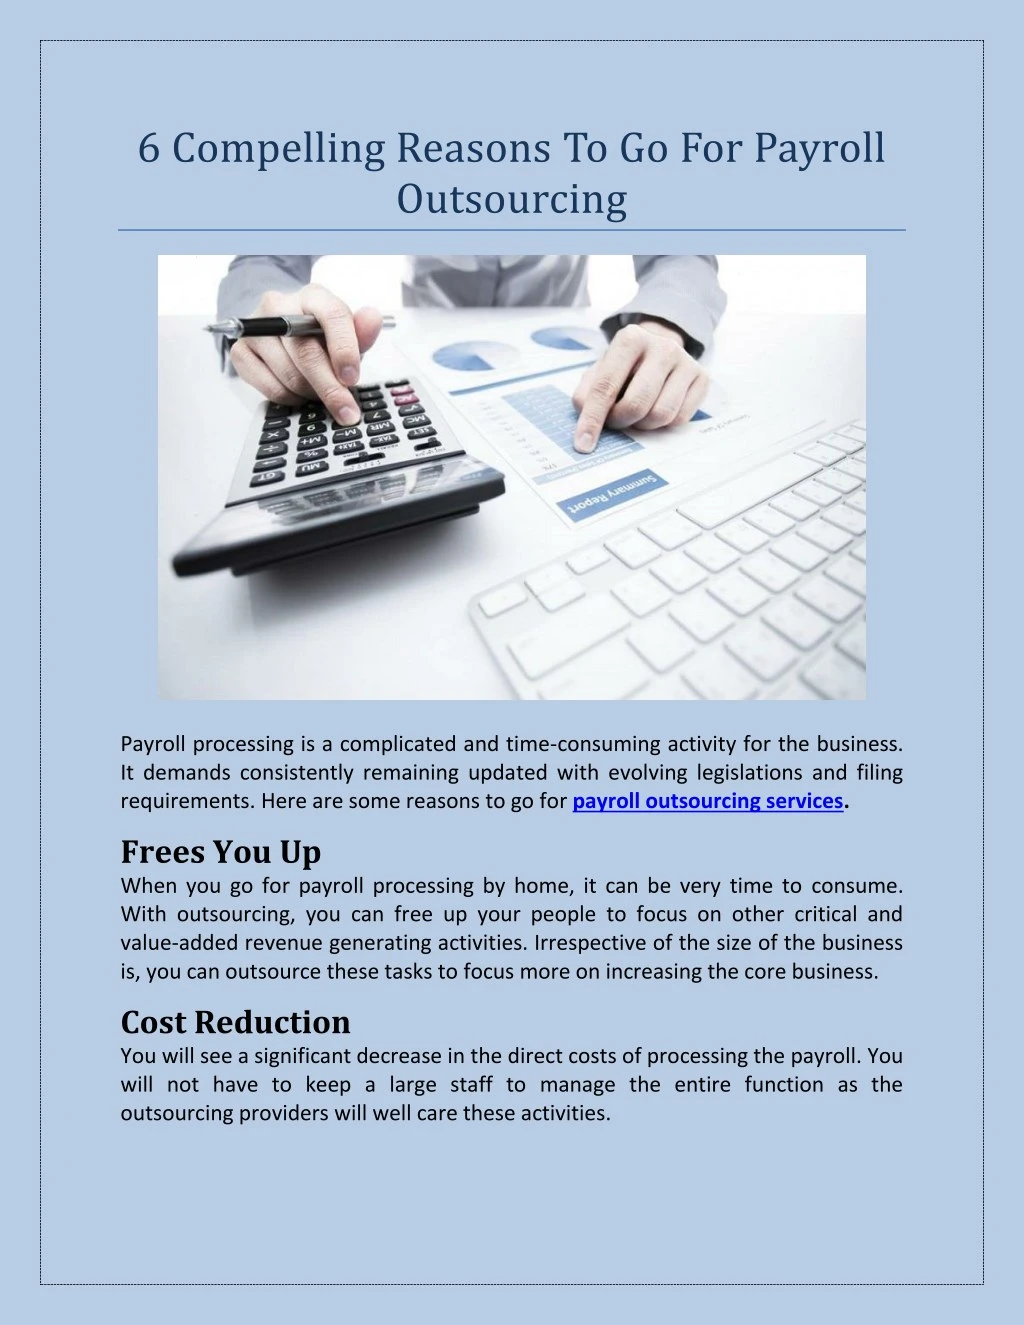 6 compelling reasons to go for payroll outsourcing